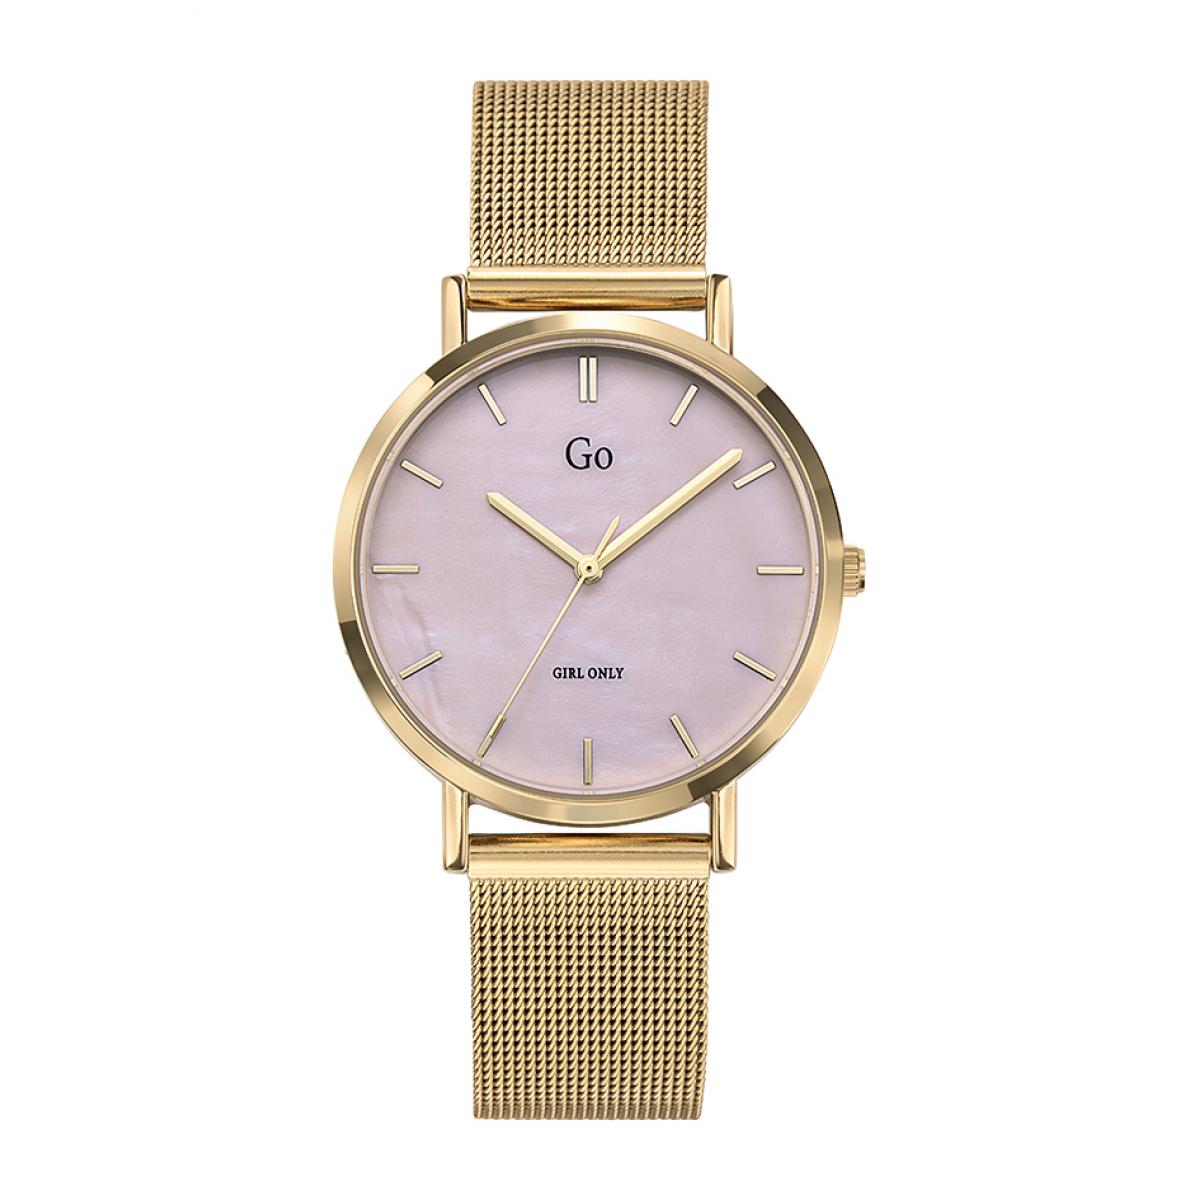 Go Girl Only Montres 695334